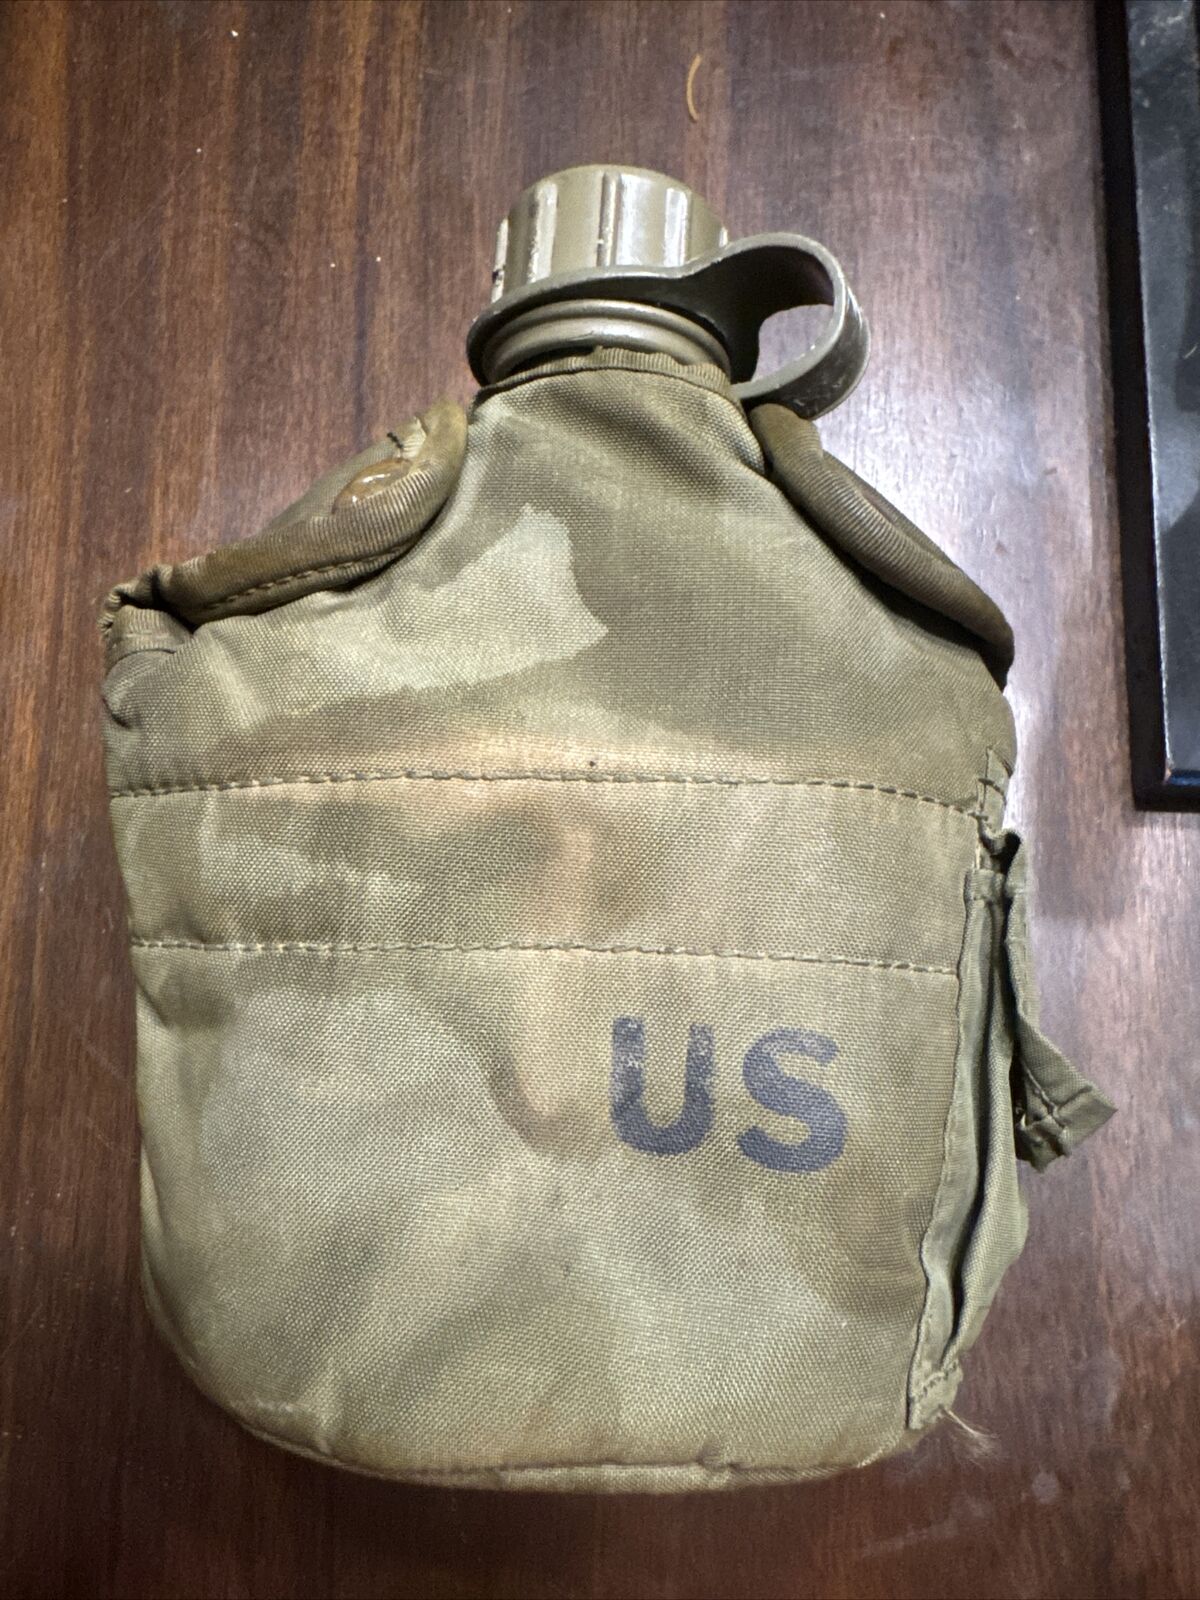 1982 U.S. Military Water Canteen Cover, With Plastic Water Canteen